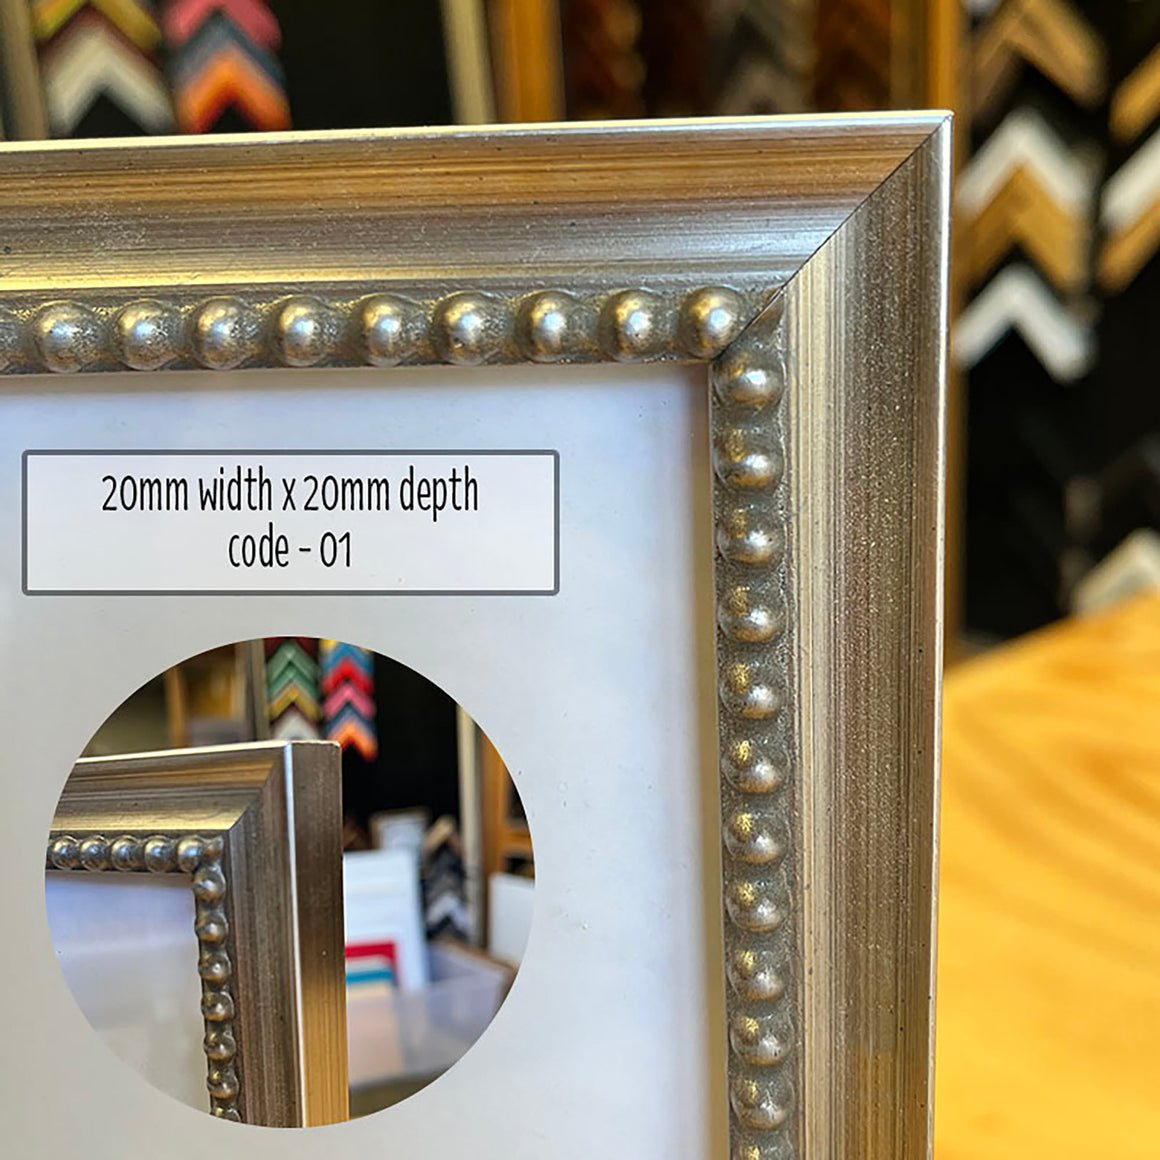 11”x14” Photo frame in ornate Metallic Silver finish made from quality framing materials. This Picture Frame is perfect for an 11inch x 14inch artwork or photo, or you can add a matboard insert for smaller A5 artwork or 8”x10” or 6”x8” photos.